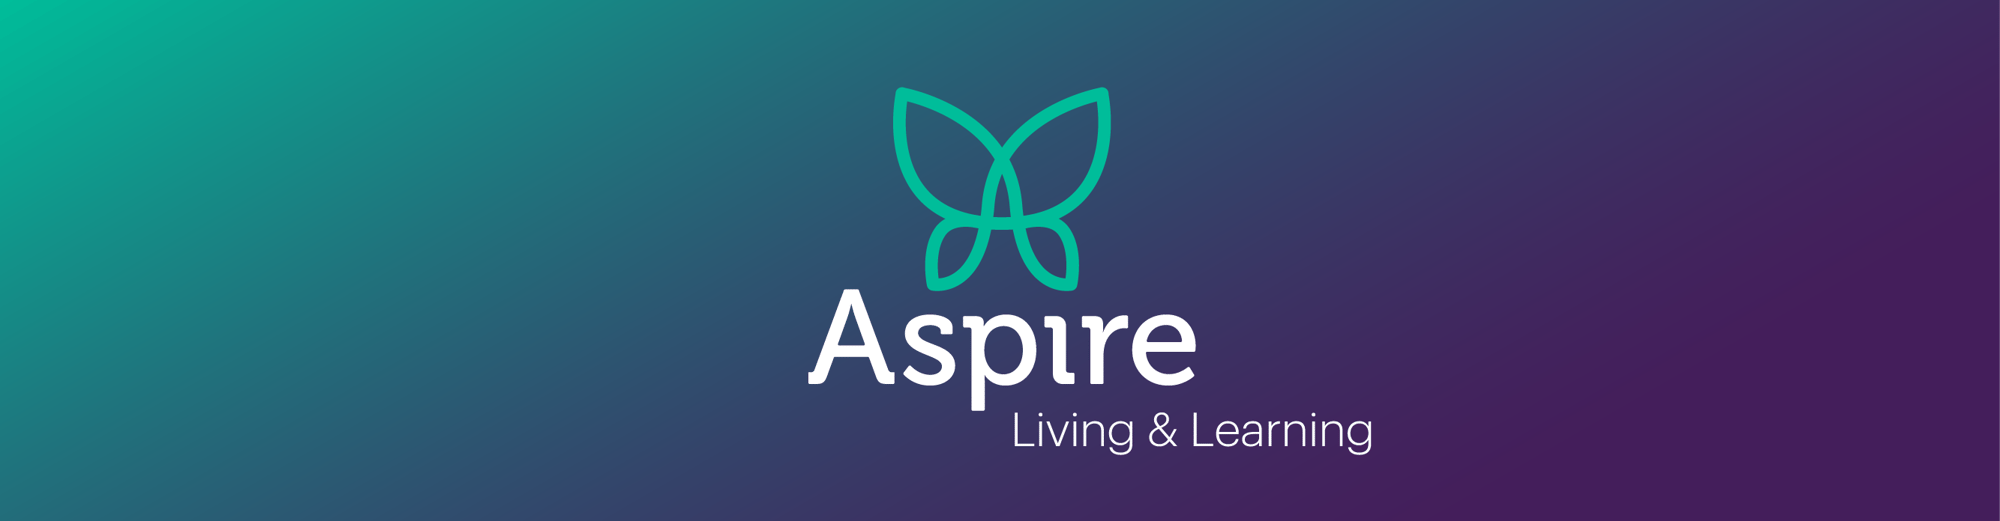 Aspire-Email-Banner